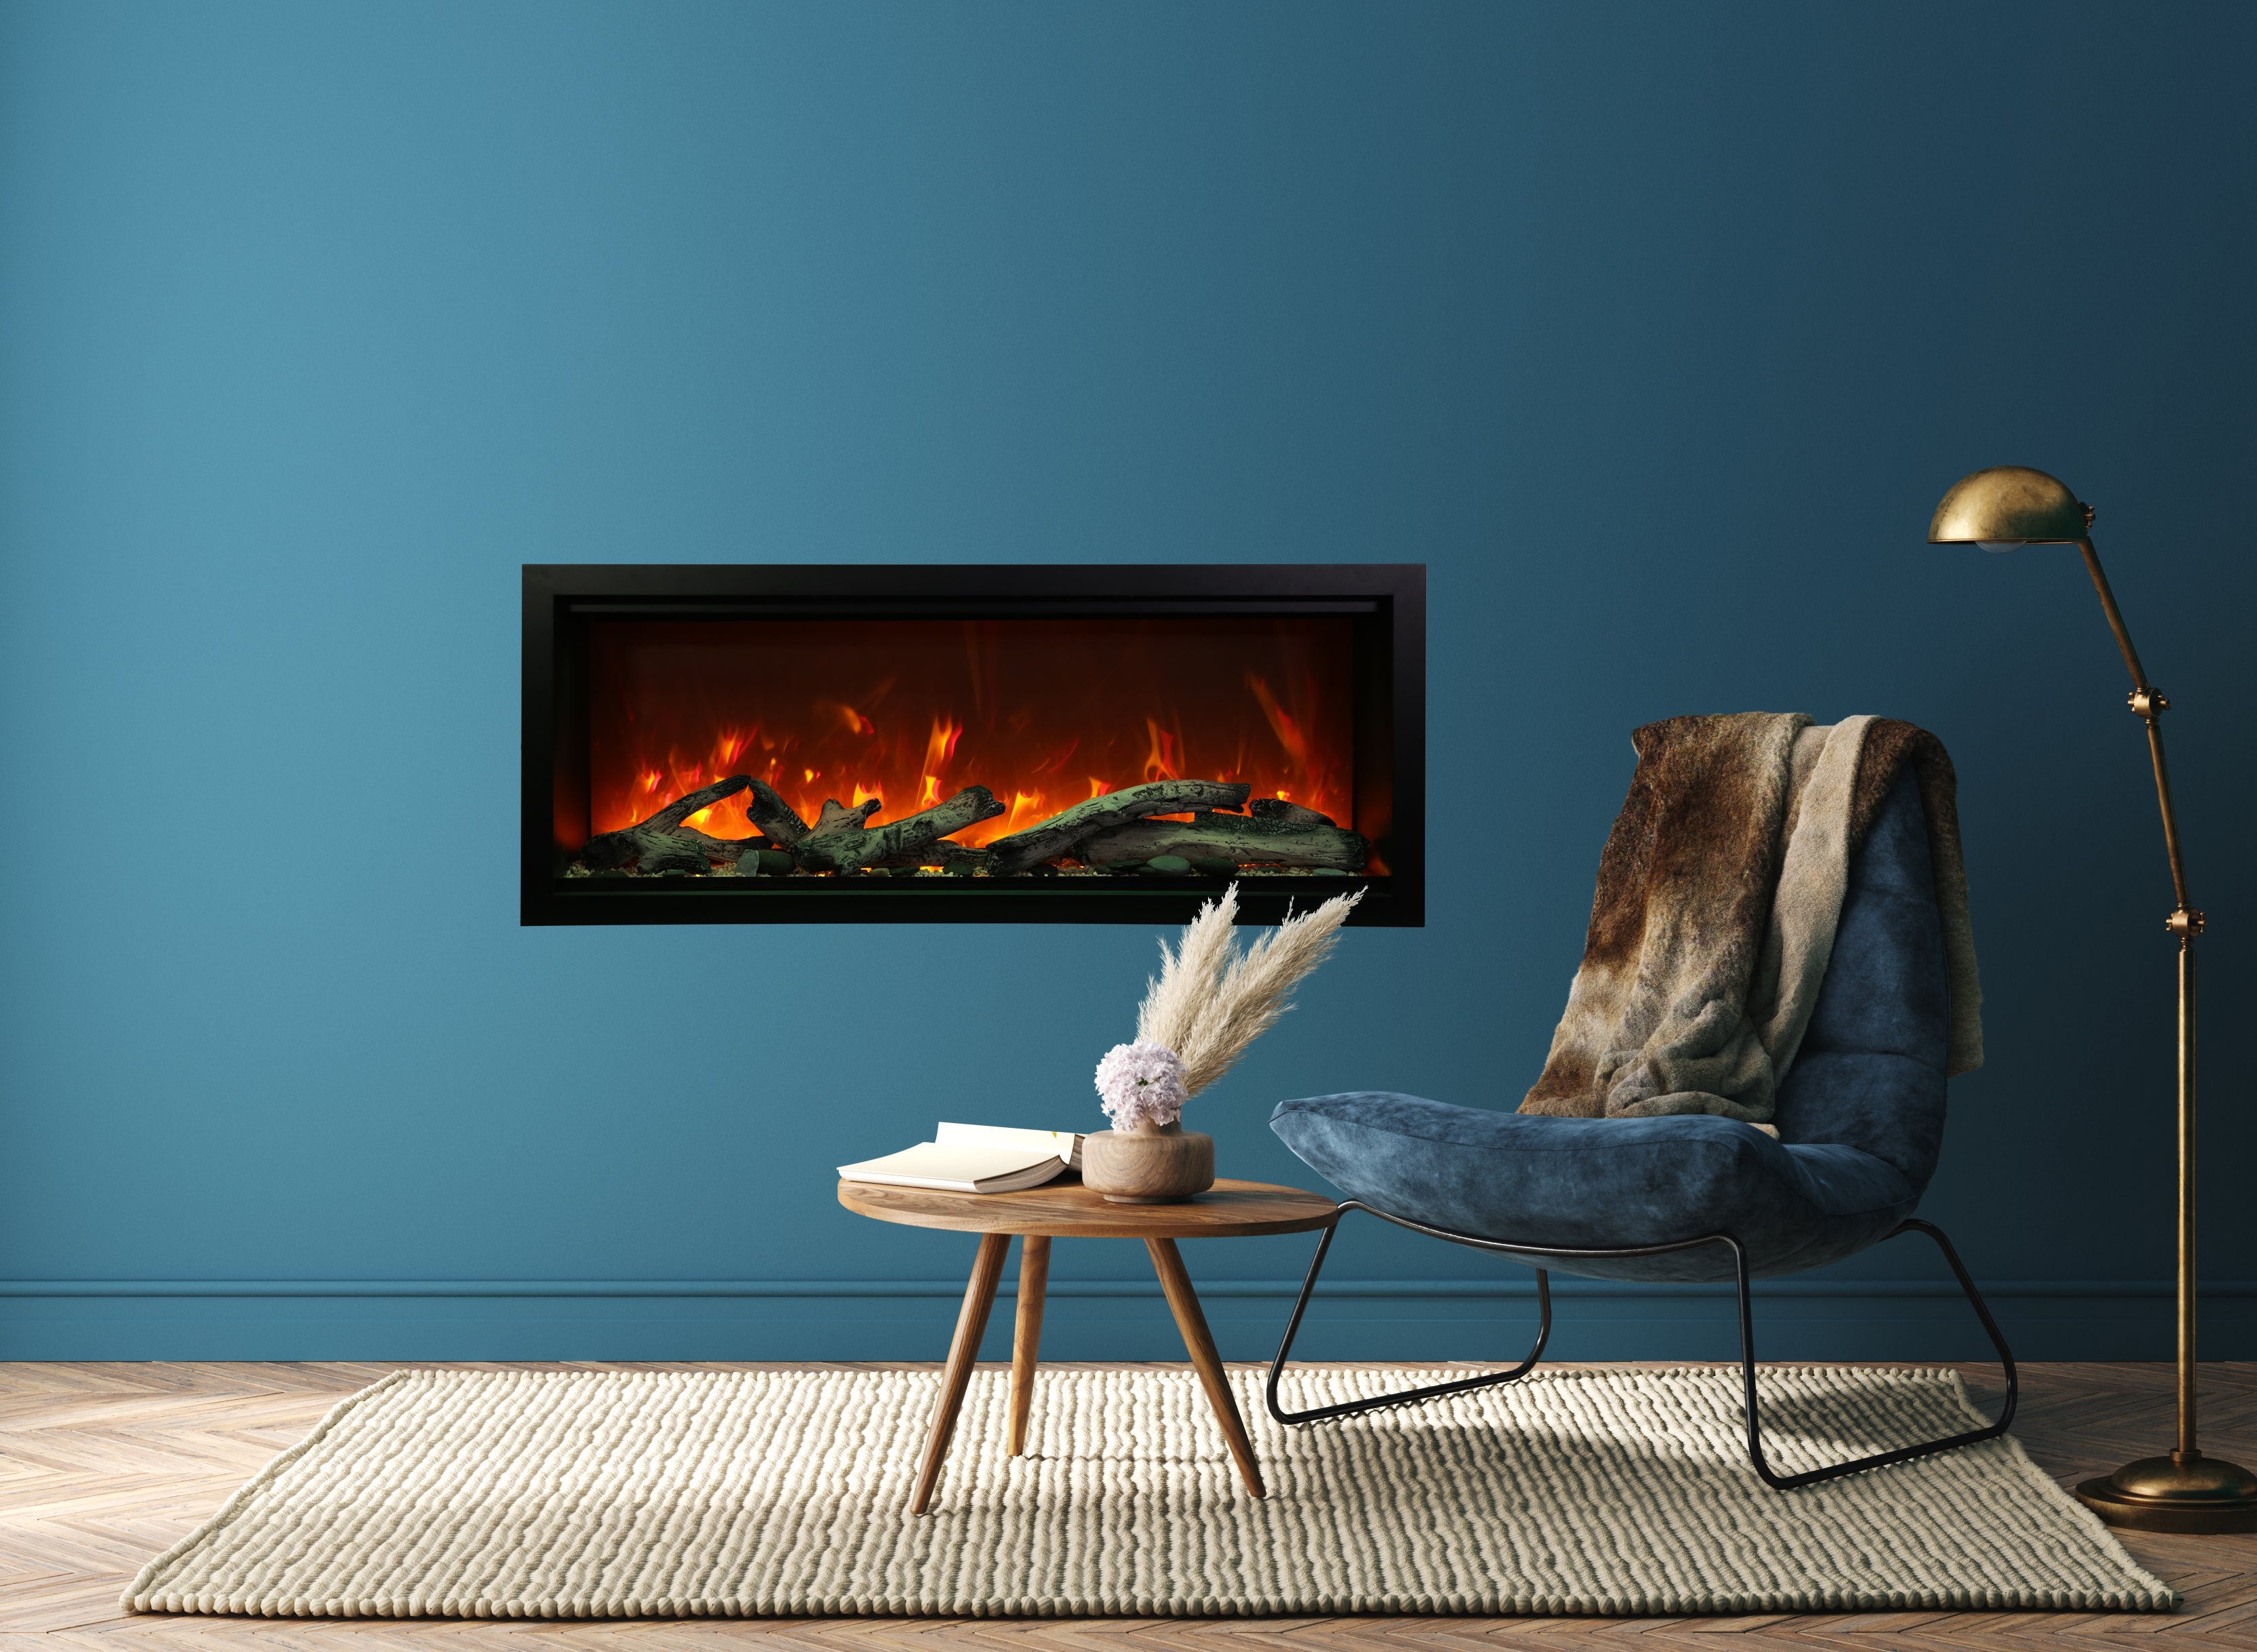 Amantii 50" Symmetry Bespoke Built-In Electric Fireplace with Wifi and Sound -SYM-50-BESPOKE- Lifestyle Heating Room With Concrete Wall Fireplace